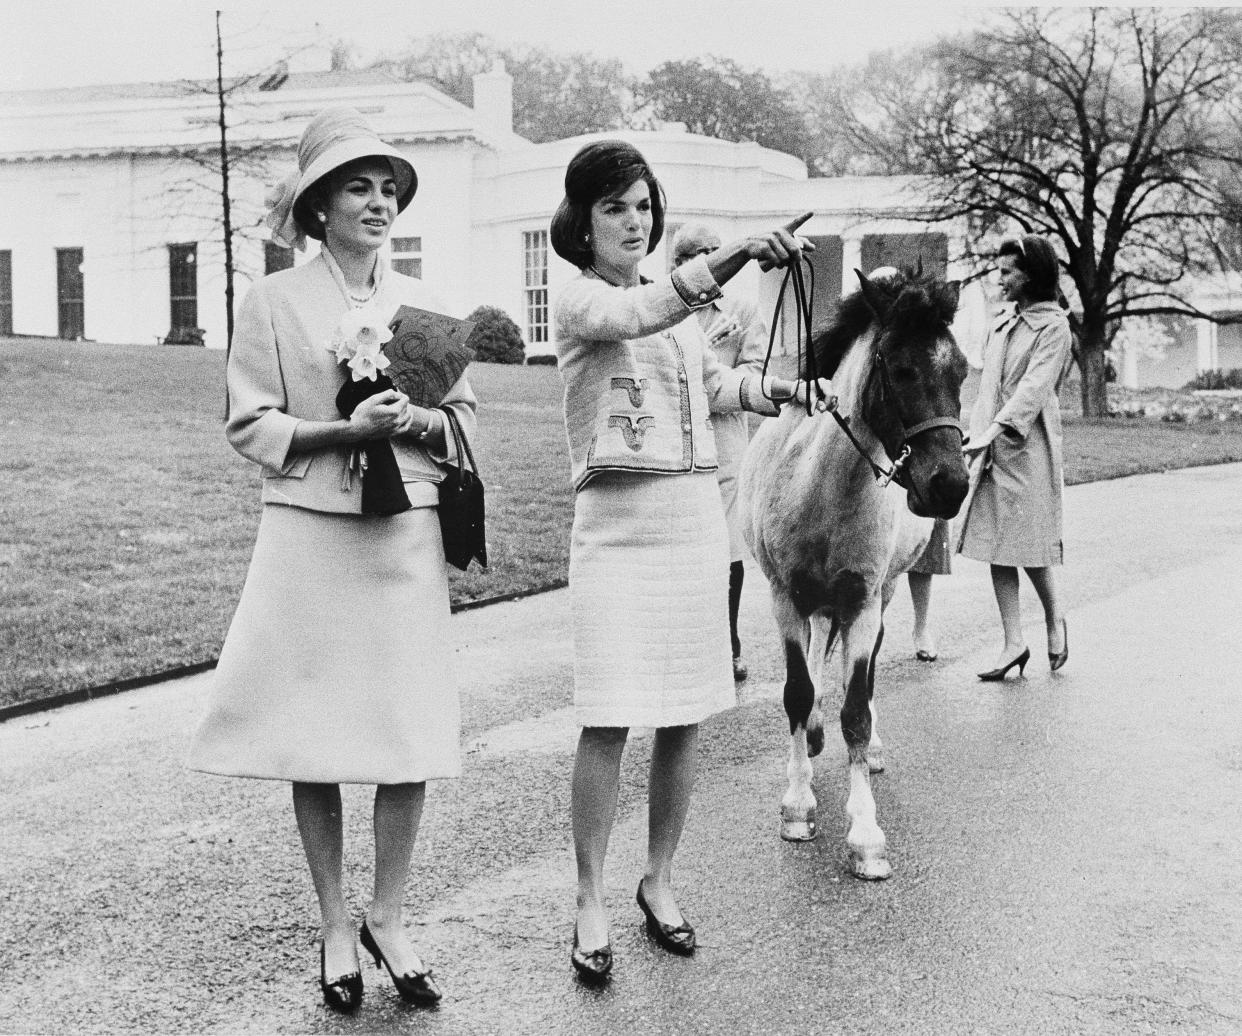 In this April 12, 1962, file photo first lady Jacqueline Kennedy gives a guided tour of the White House grounds to Empress Farah Pahlavi of Iran in Washington. Kennedy leads her daughter Caroline's pony, Macaroni, which had been nuzzling the empress, attracted by the daffodils she was carrying. In the background is the first lady's press secretary, Pamela Turnure. (AP Photo/Pool, File)